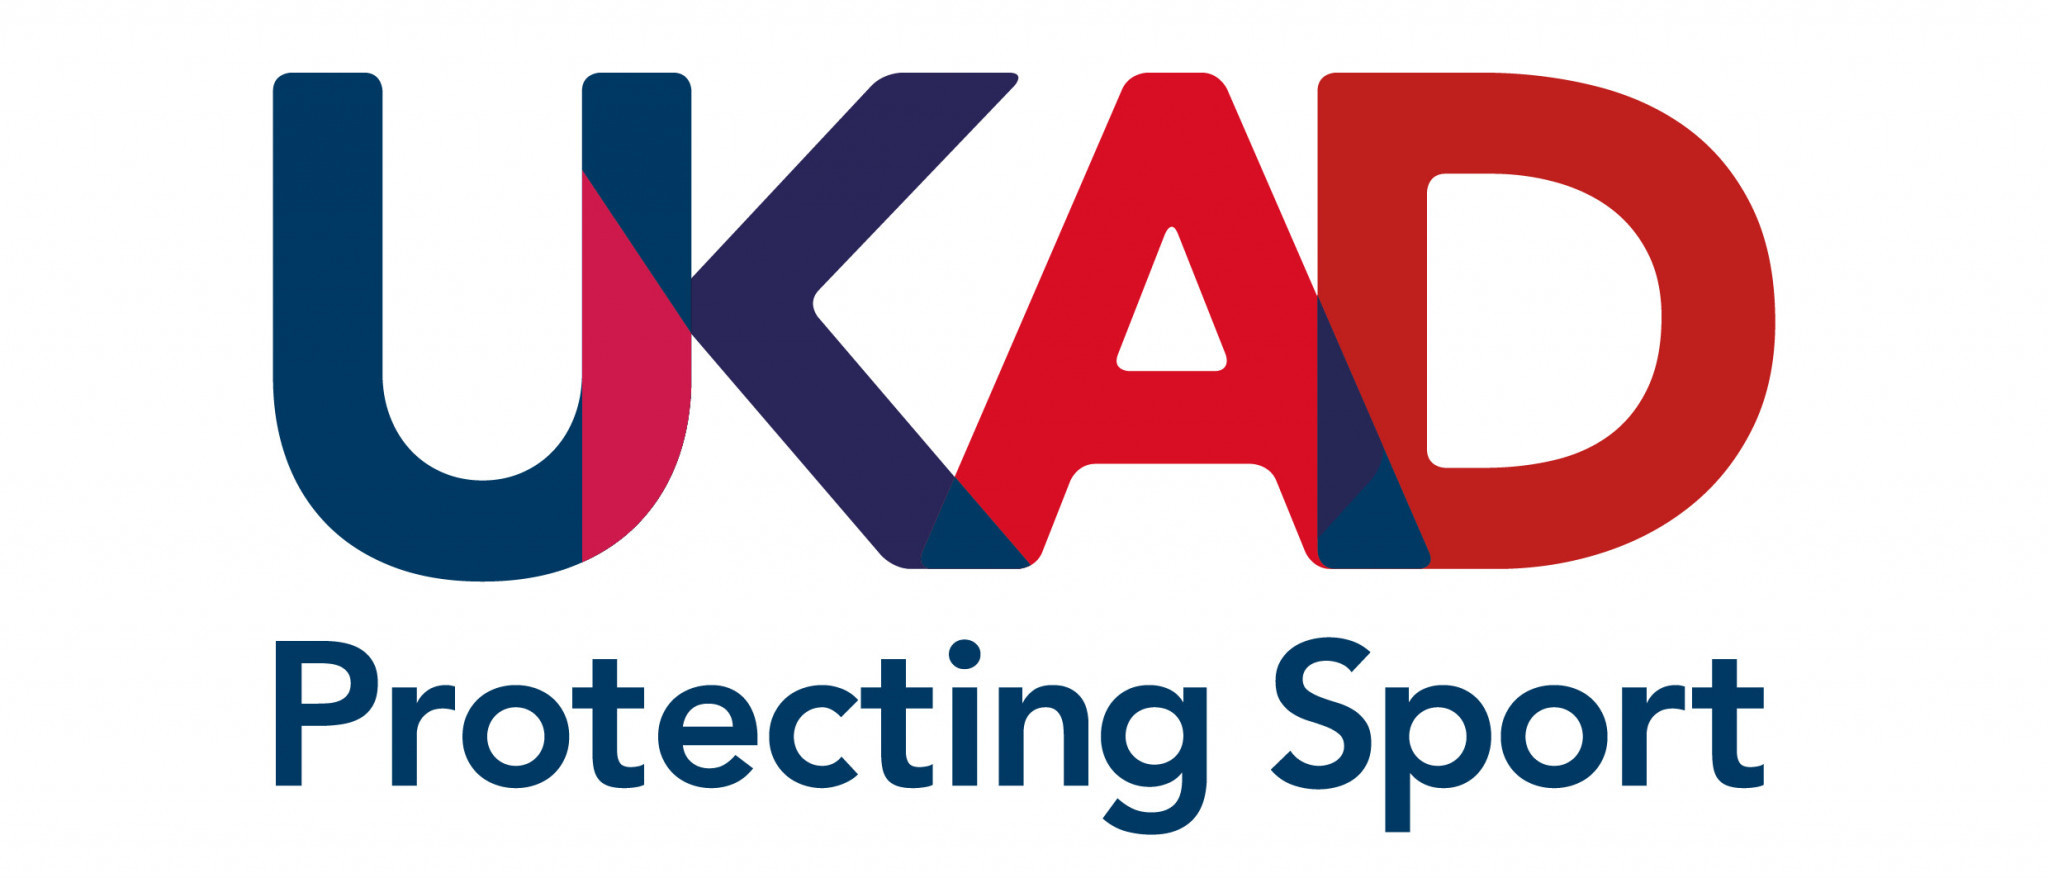 UKAD faces further criticism over handling of 2014 contamination case